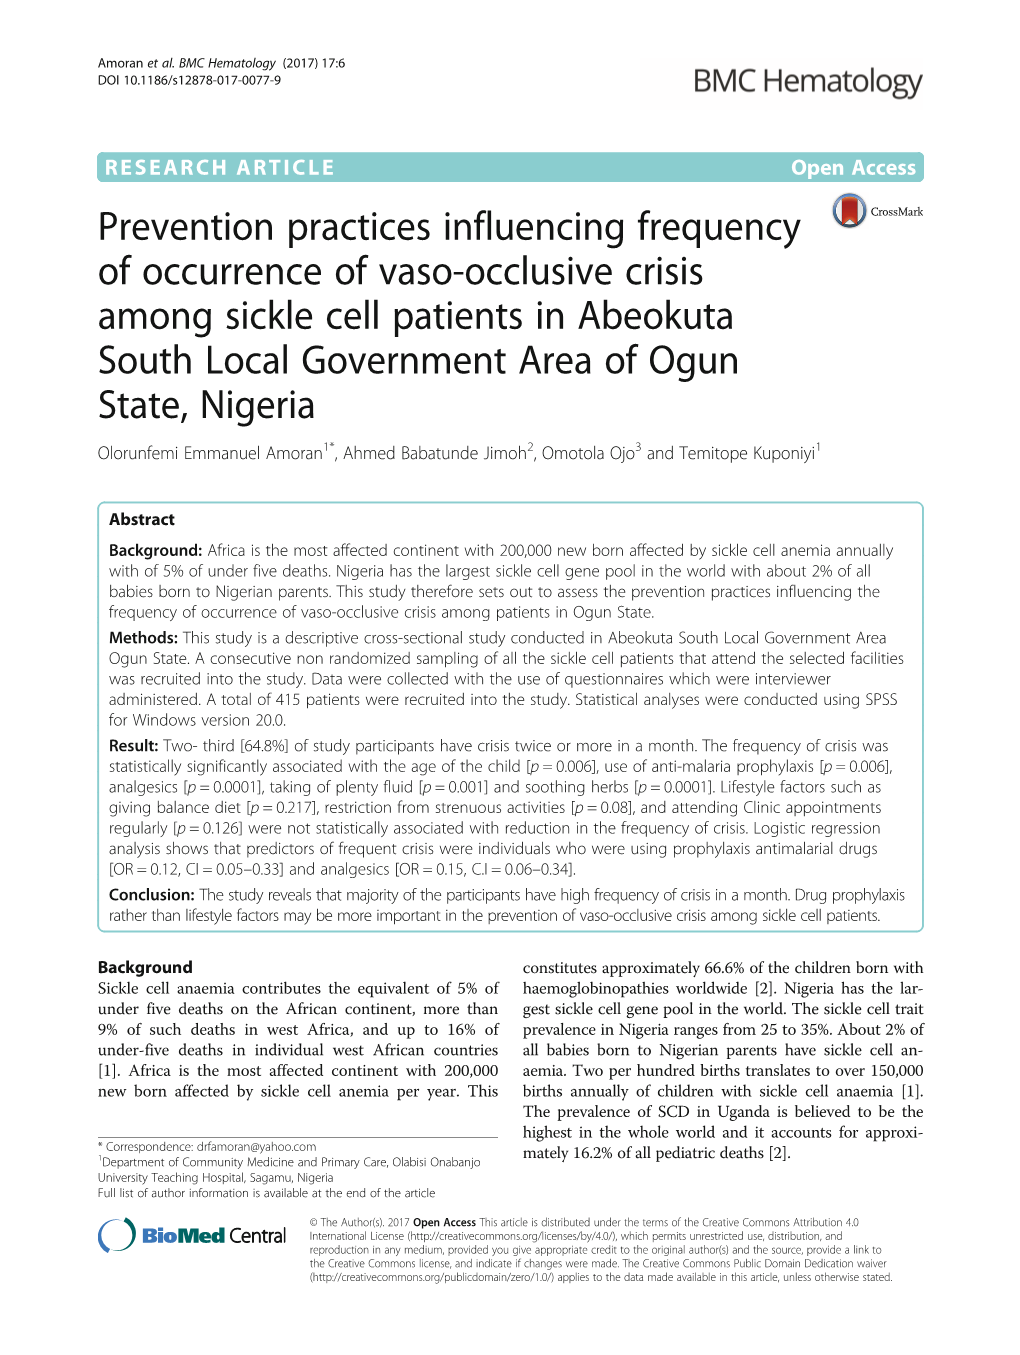 Prevention Practices Influencing Frequency of Occurrence of Vaso